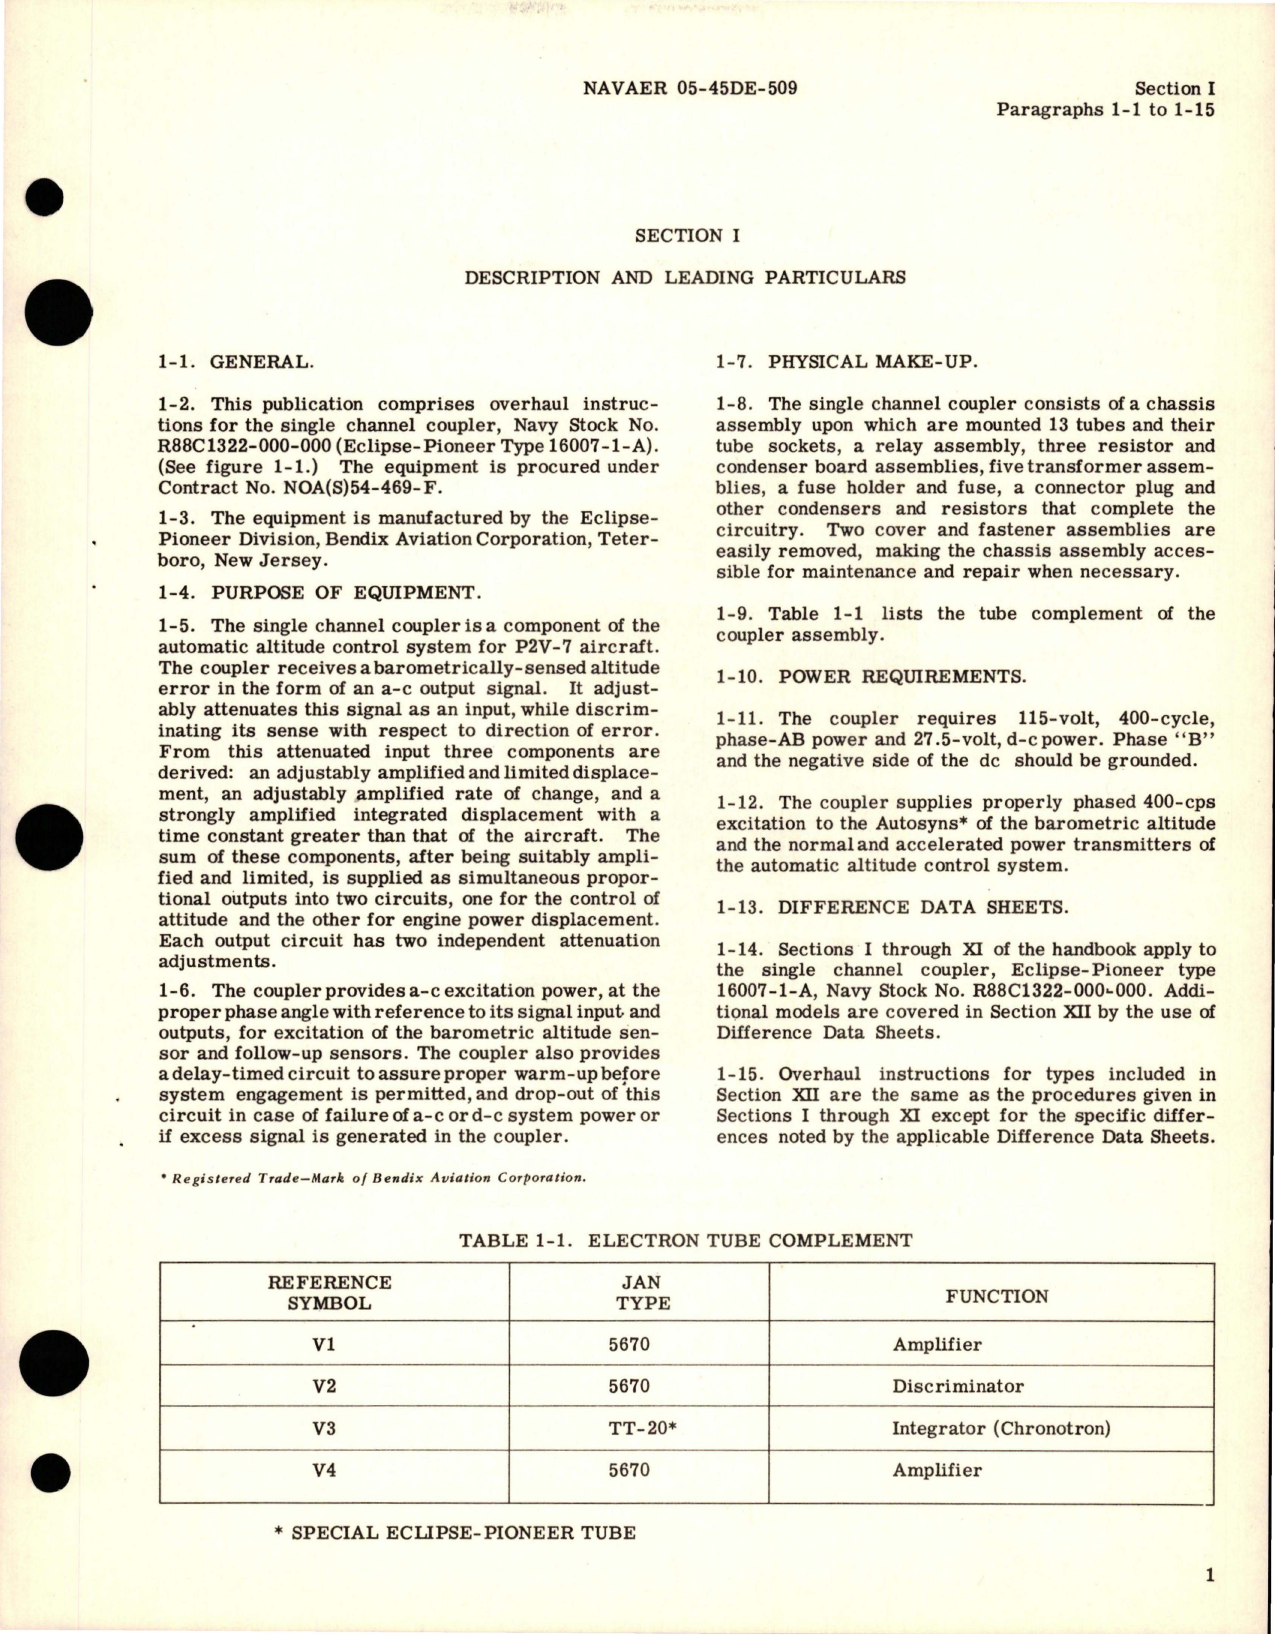 Sample page 5 from AirCorps Library document: Overhaul Instructions for Single Channel Coupler - Part 16007-1-A